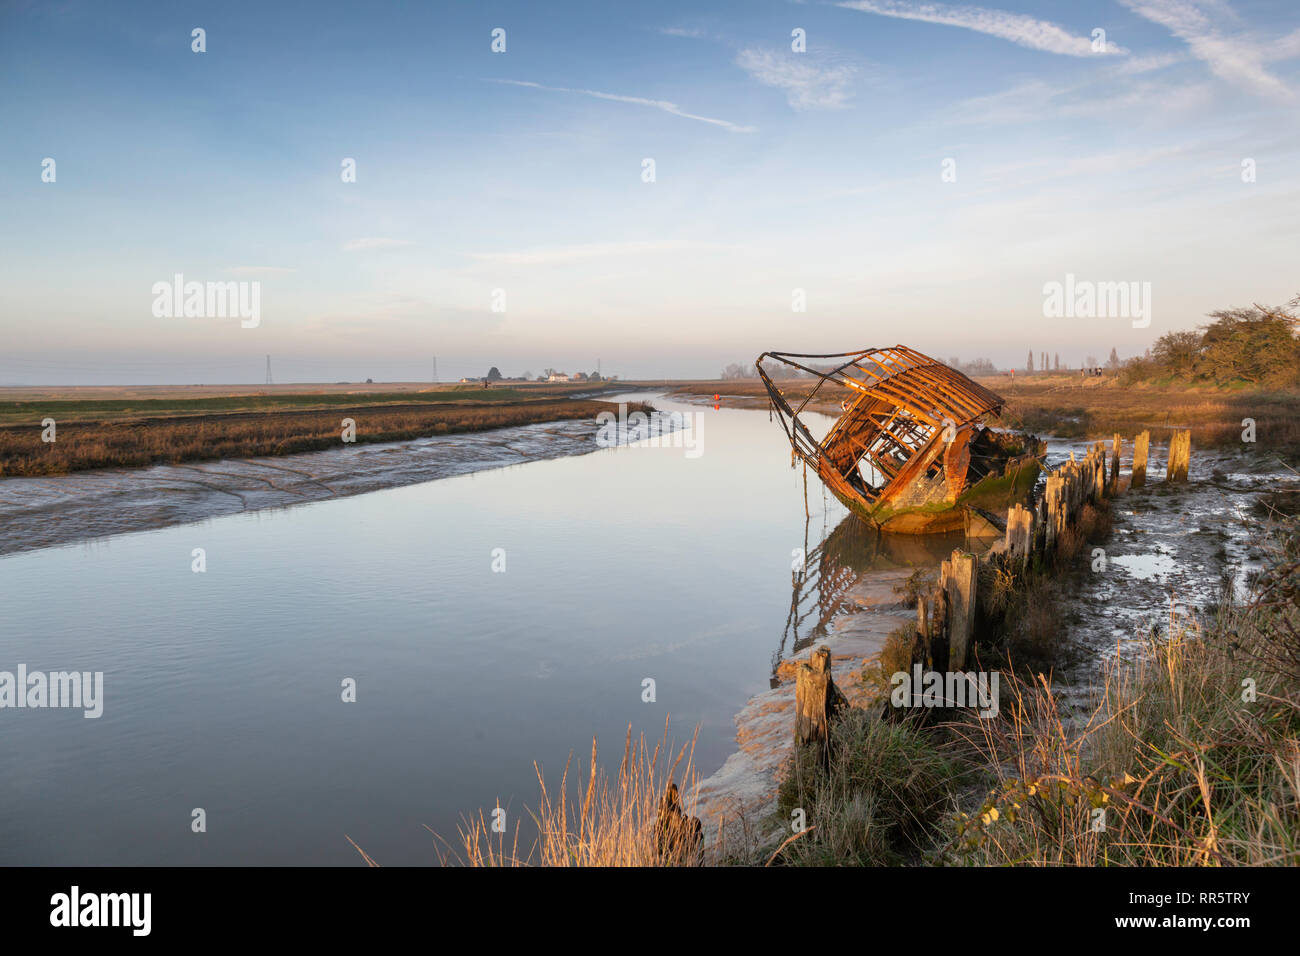 The wreck of the pirate ship in Faversham Creek during a late February afternoon. Stock Photo